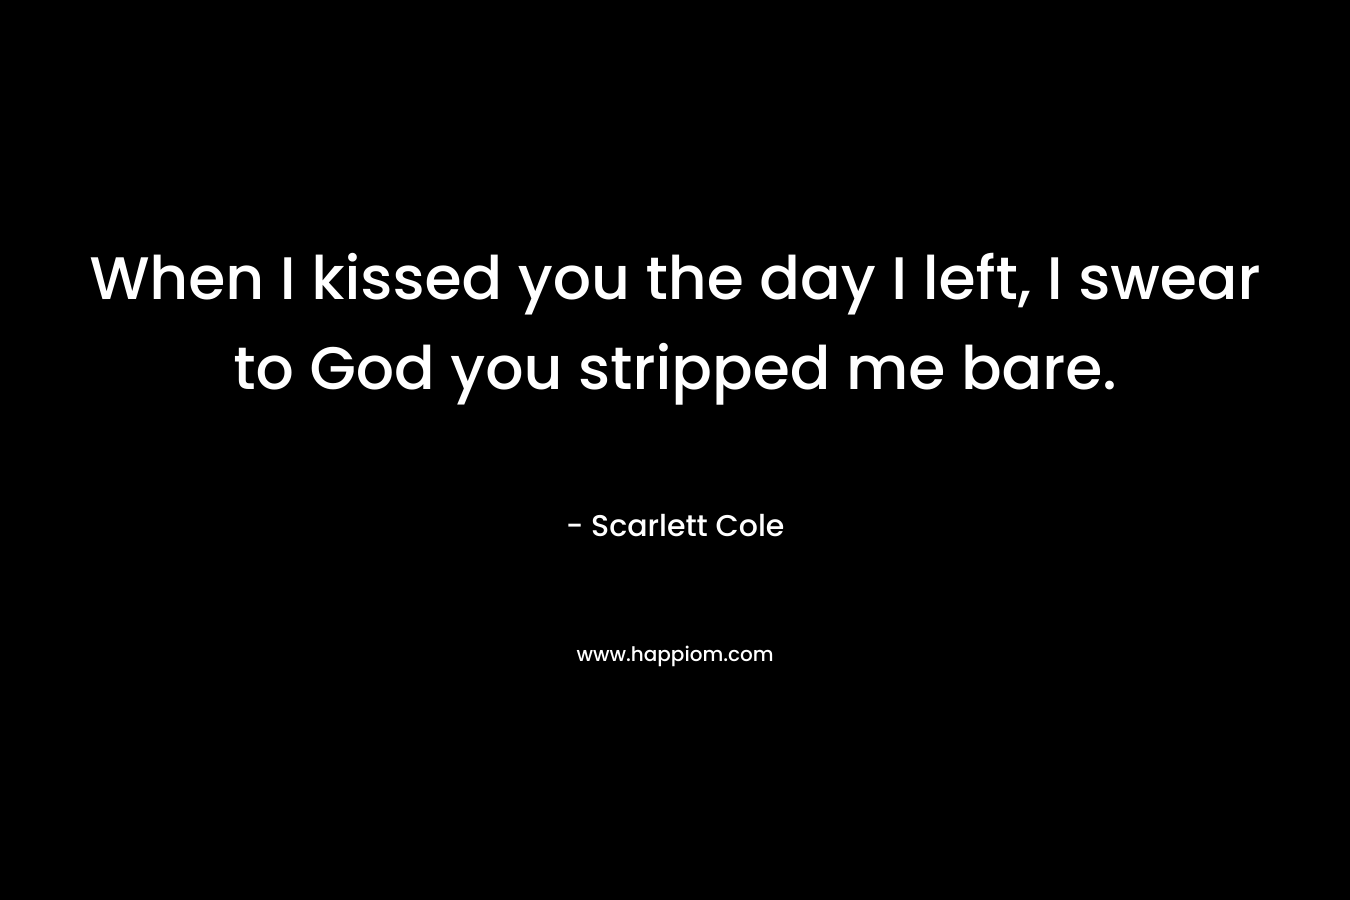 When I kissed you the day I left, I swear to God you stripped me bare. – Scarlett Cole